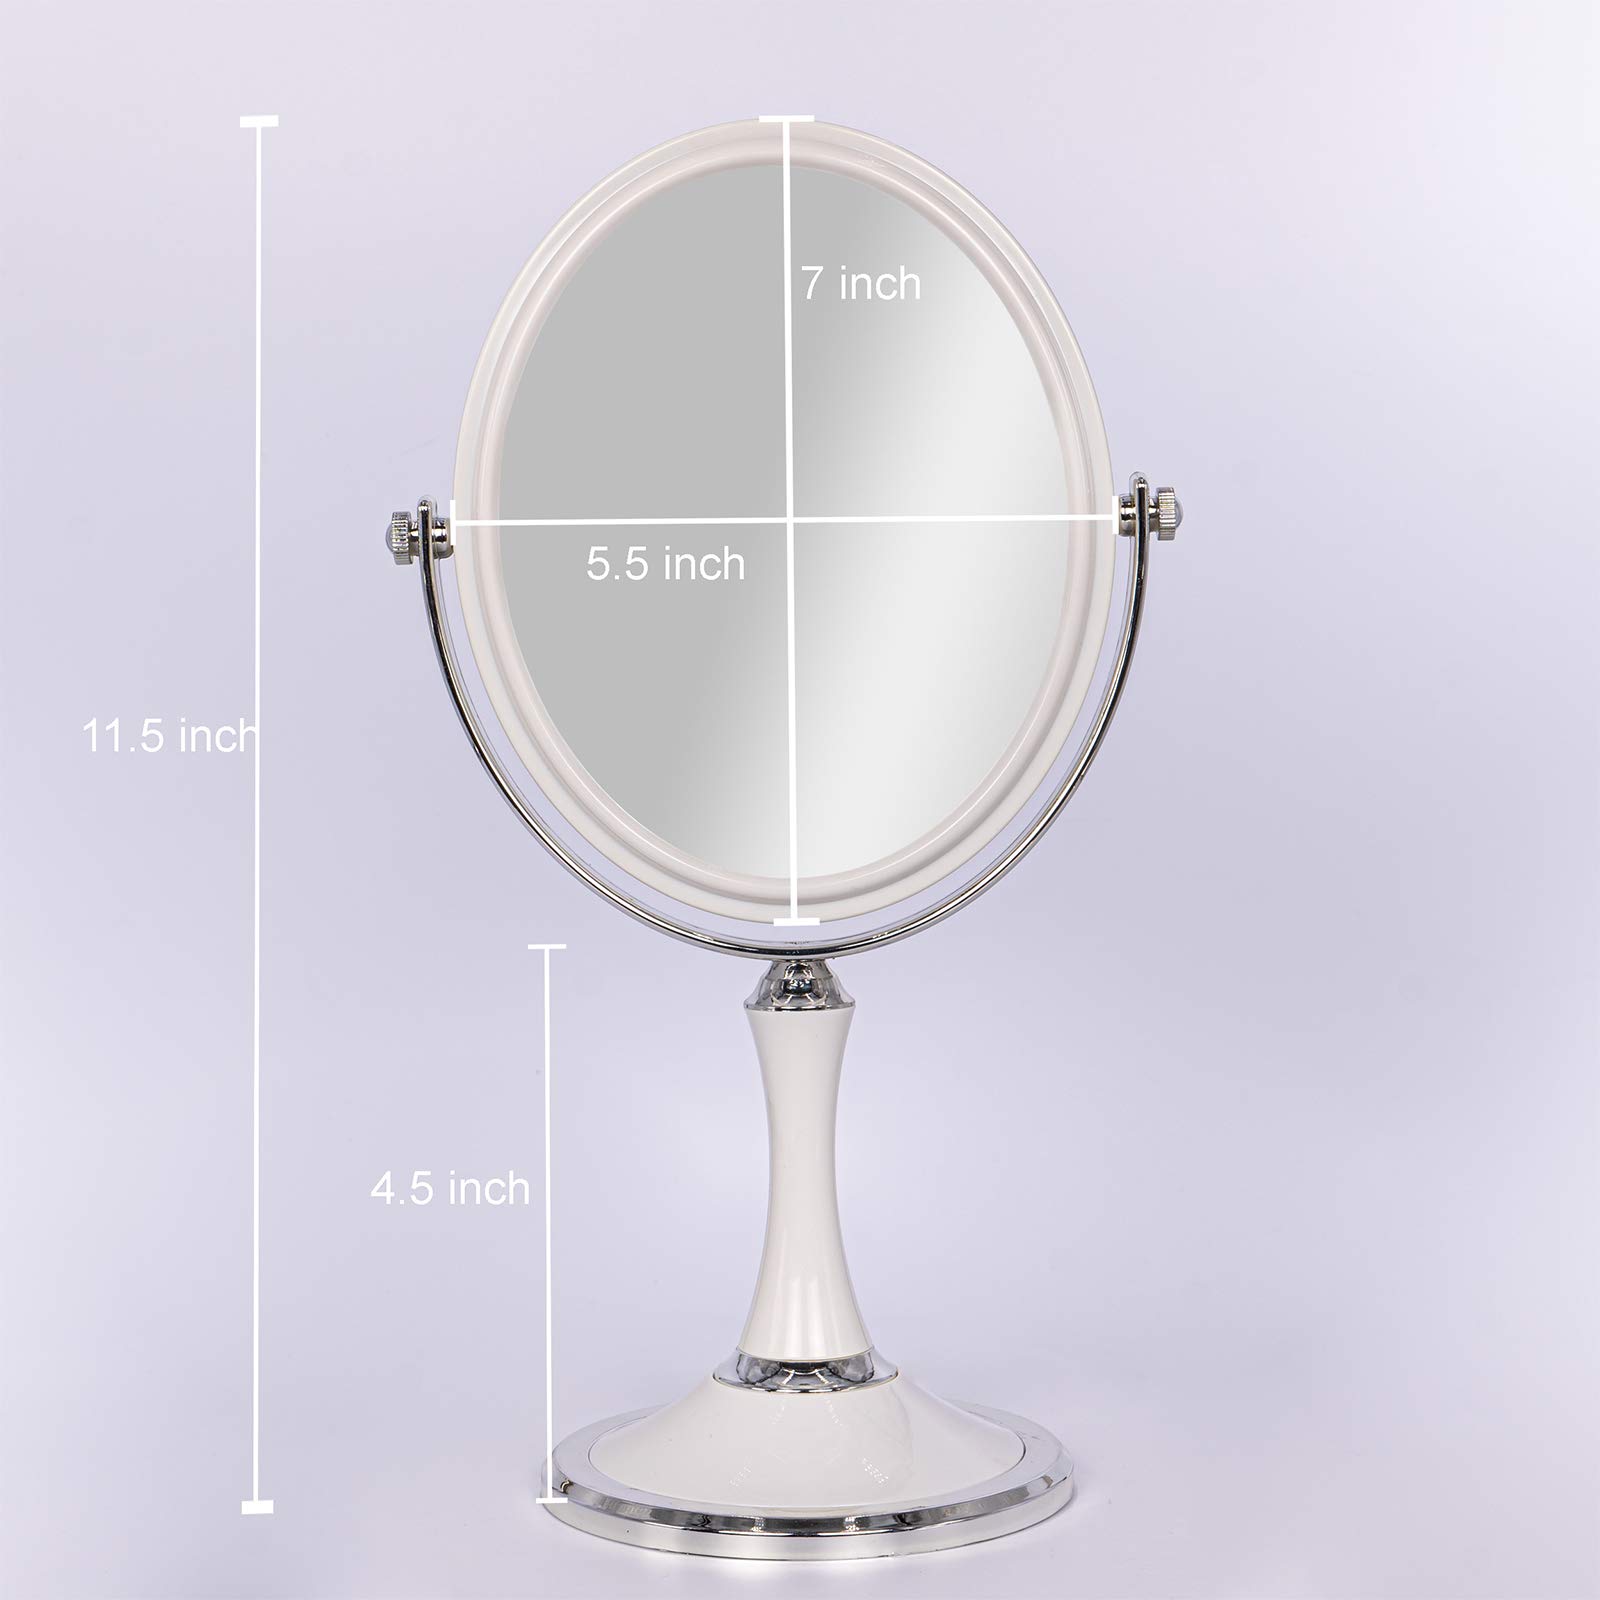 PINKZIO Tabletop Makeup Portable Two Sided 1X & 3X Magnifying Light-Weight Vanity Mirror with 360 Degree Swivel, ABS Plastic, White